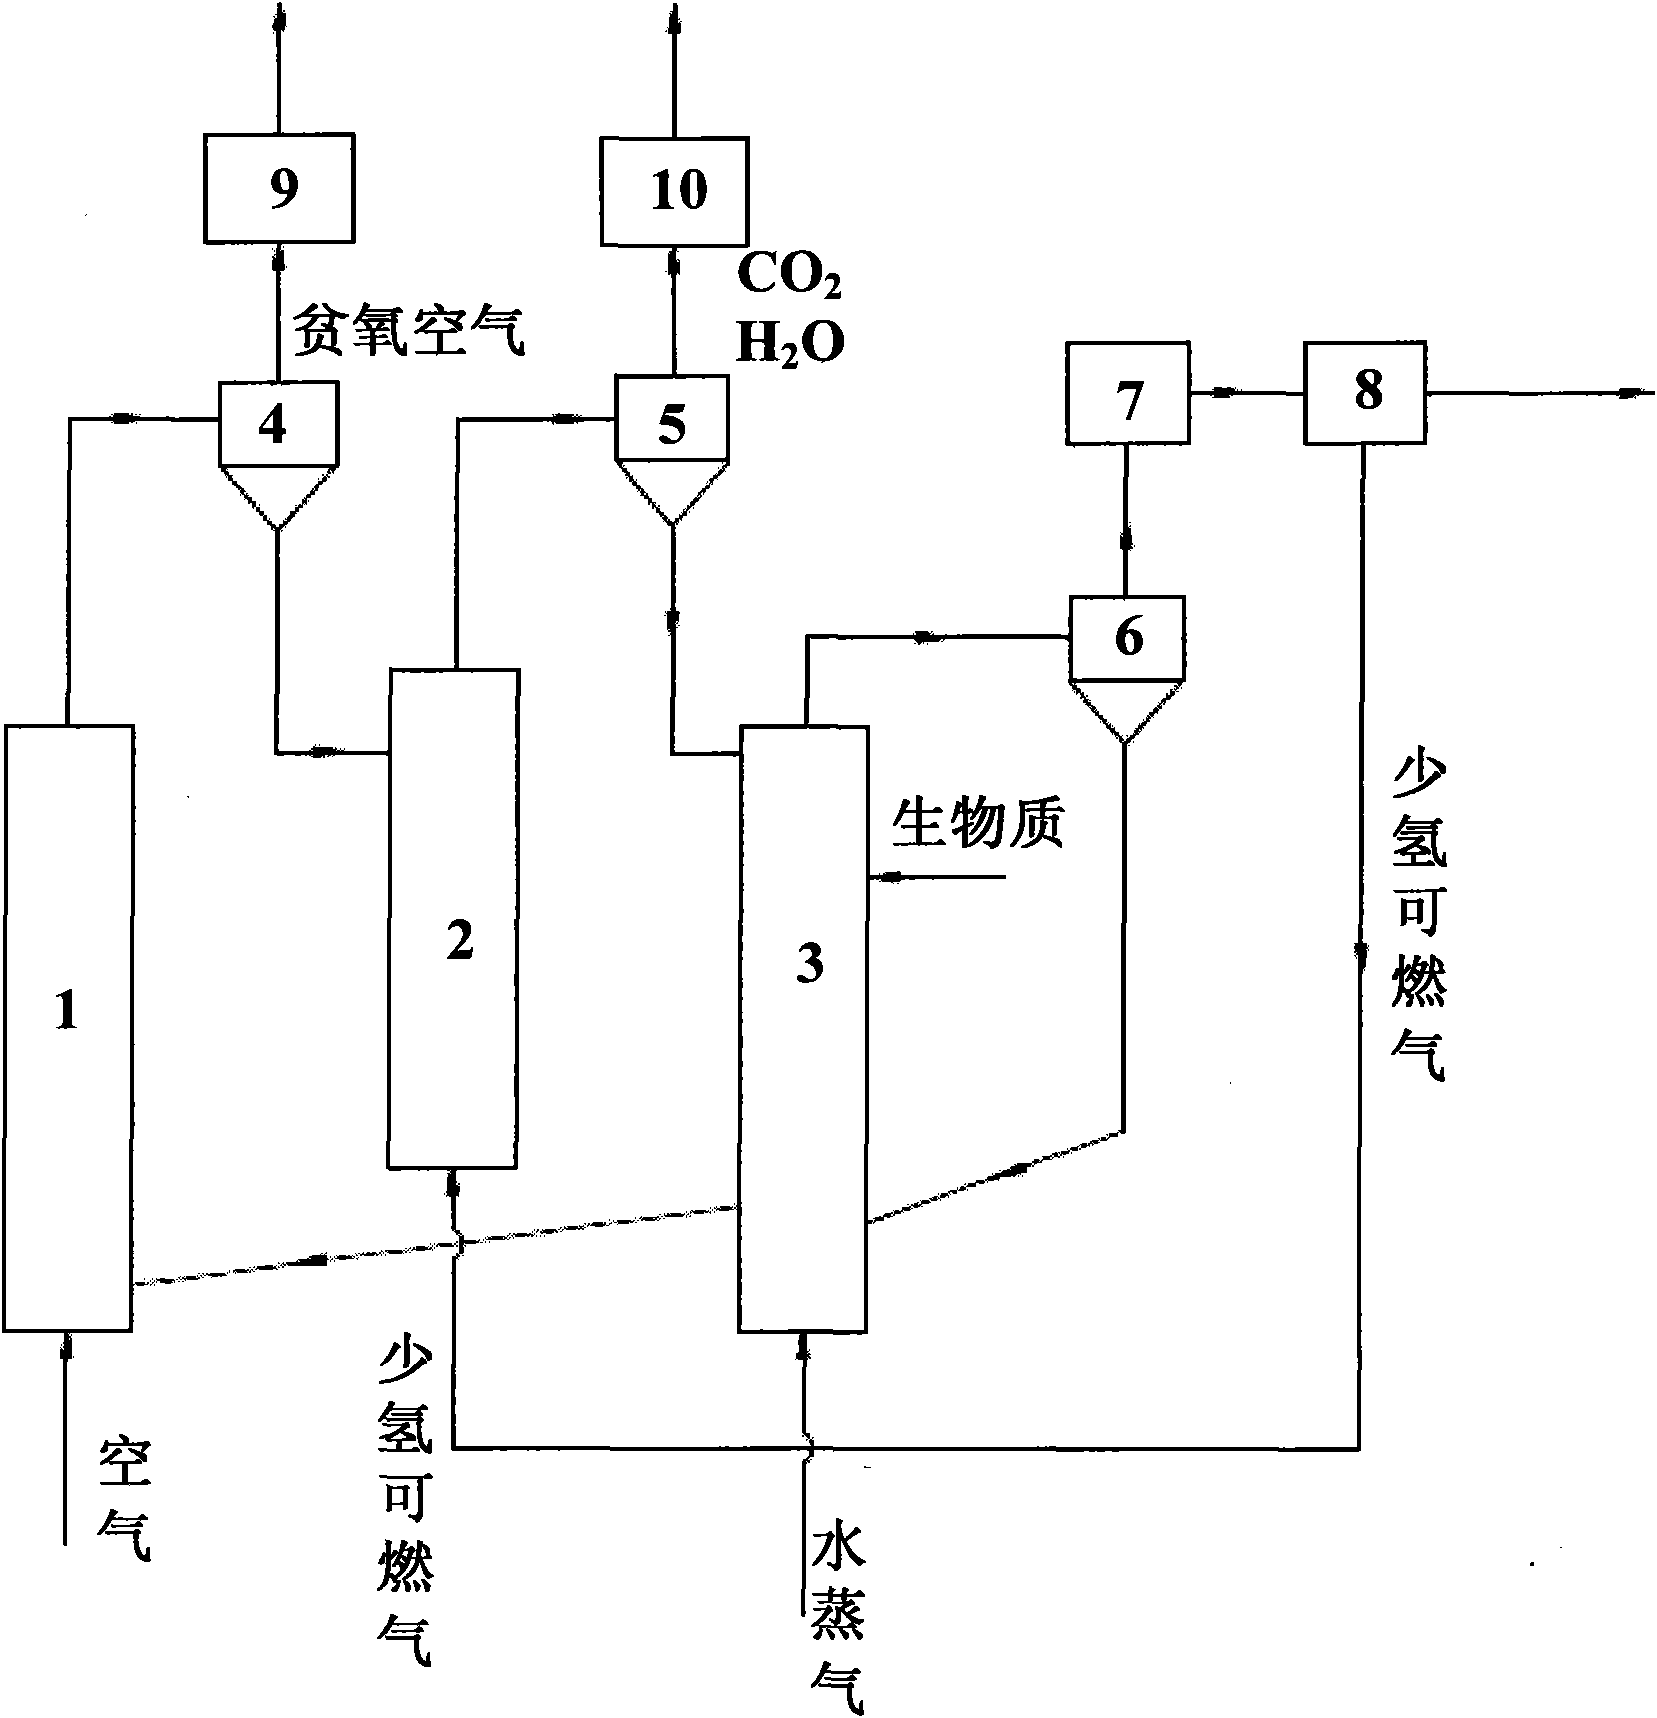 Biomass gasification hydrogen-producing system and method